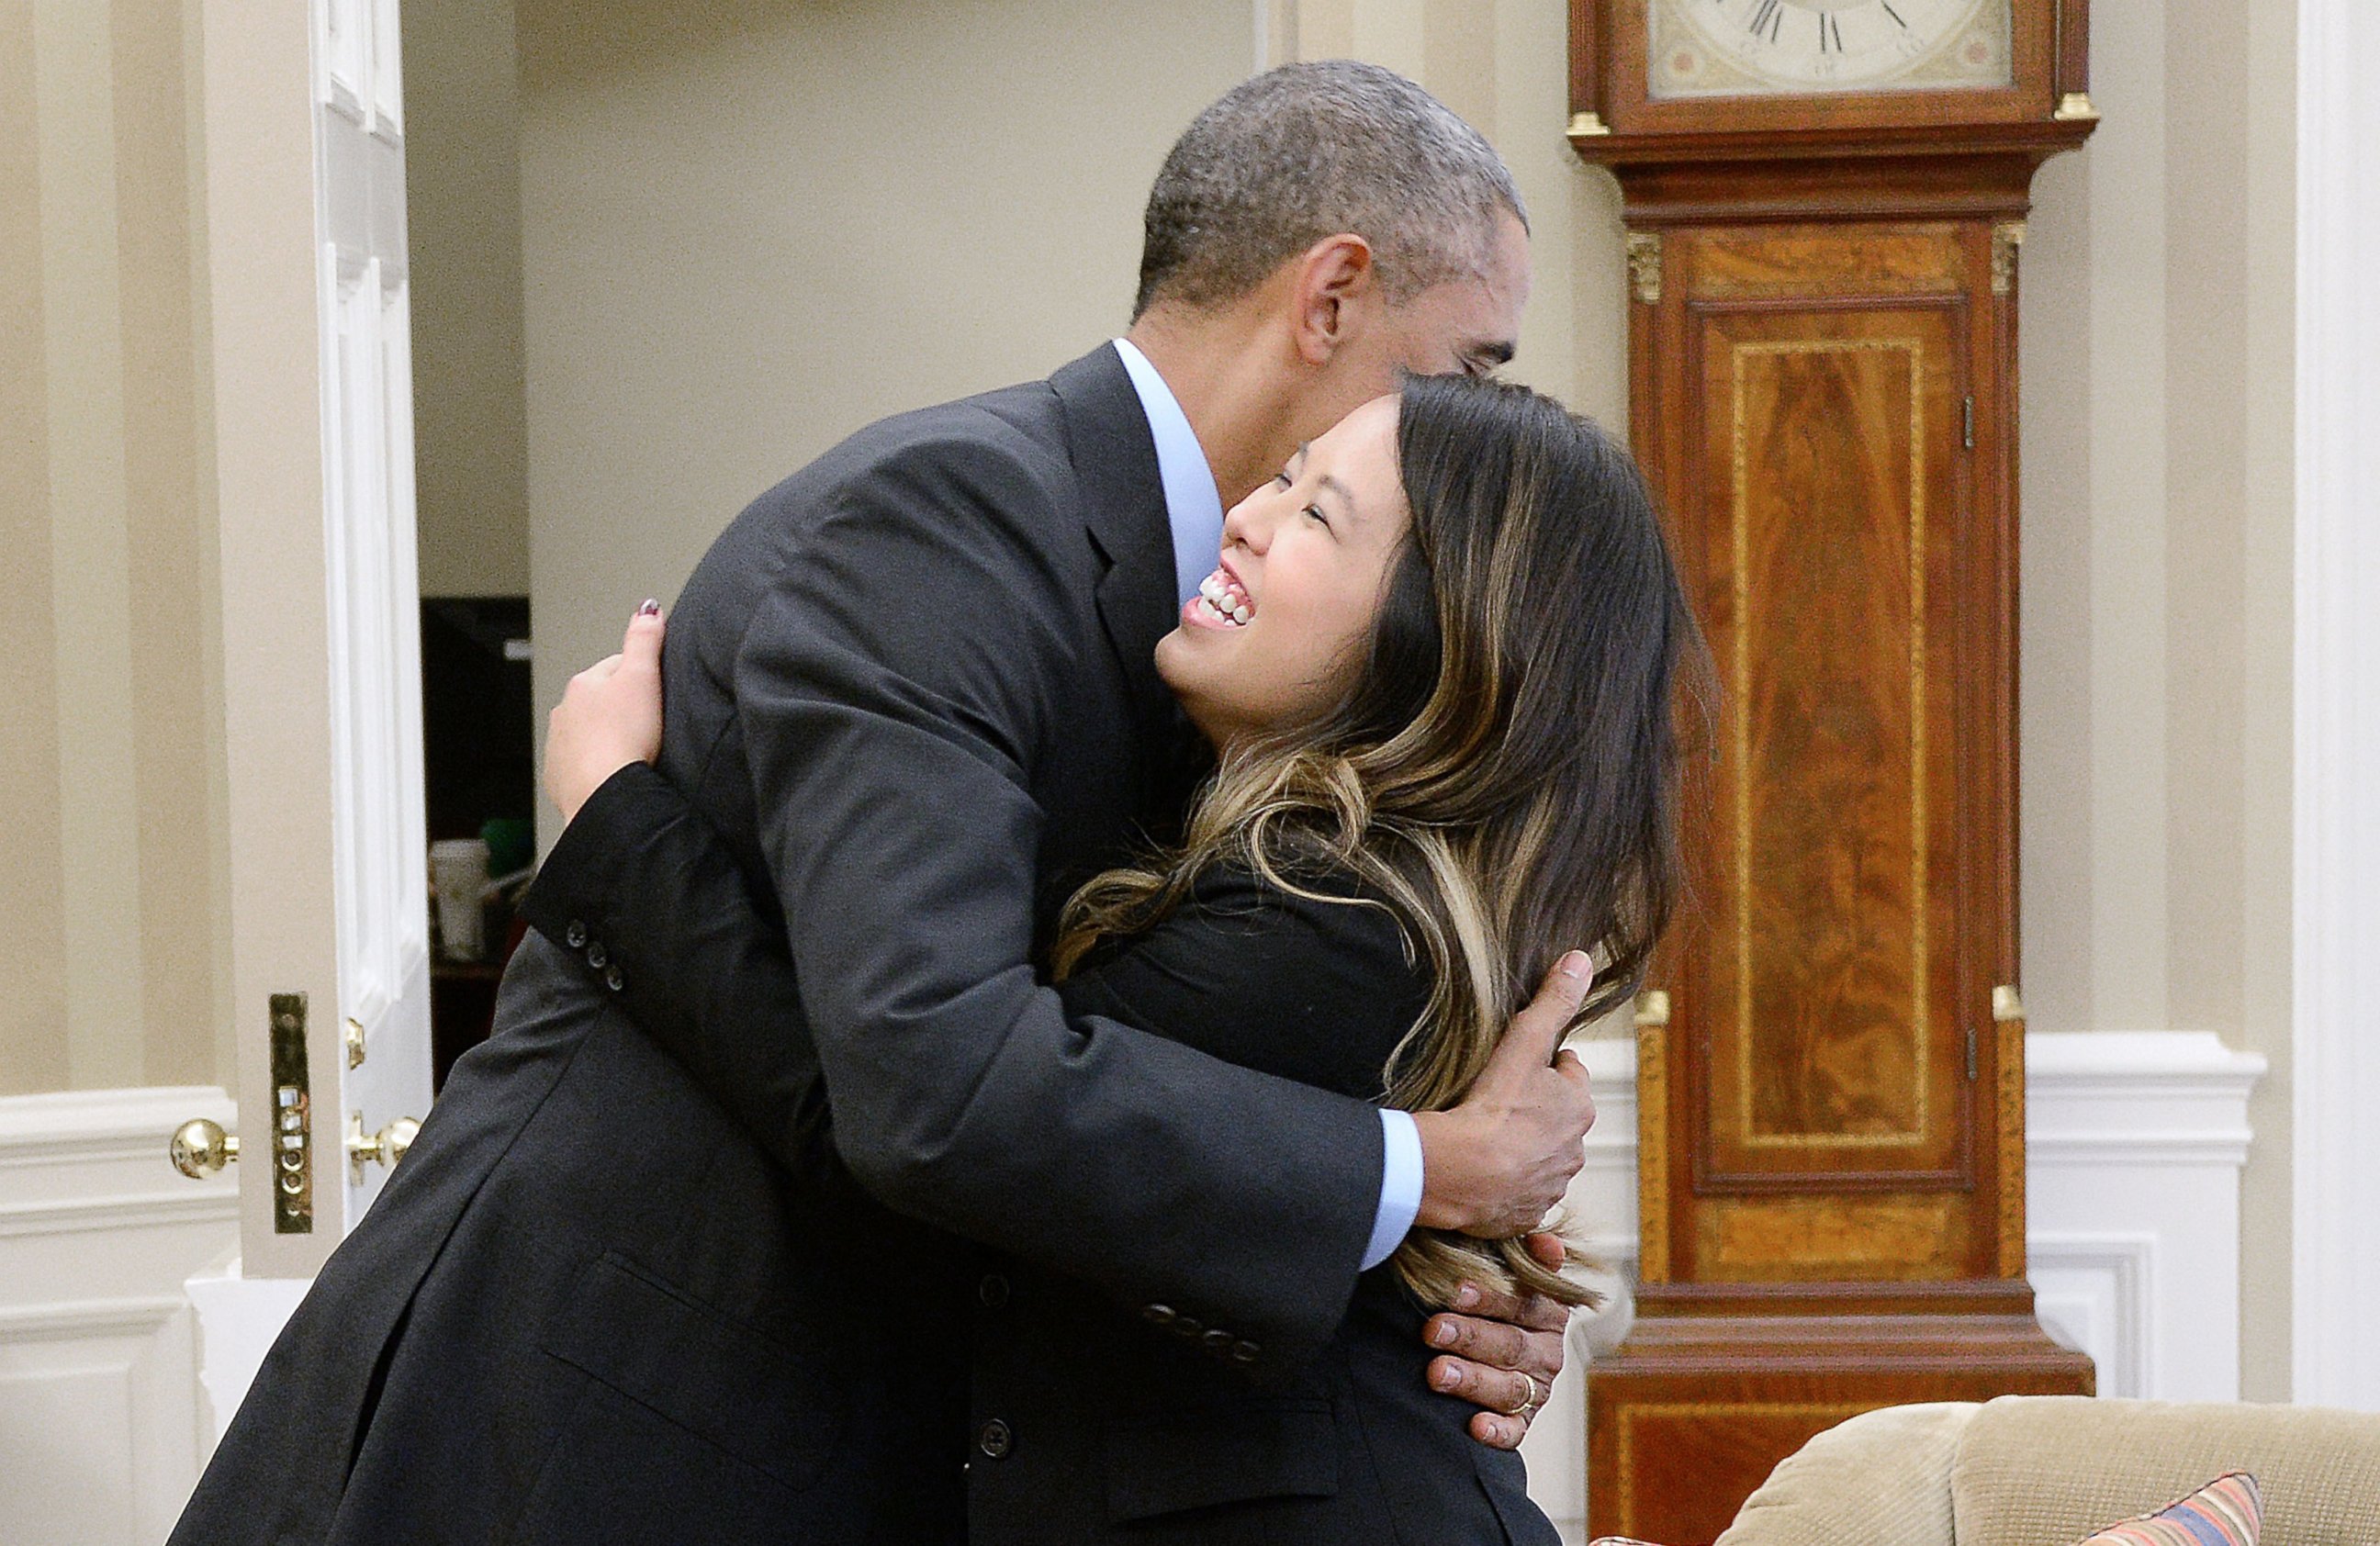 PHOTO: President Barack Obama gives a hug to Dallas nurse Nina Pham in the Oval Office of the White House on Oct. 24, 2014 in Washington, D.C.